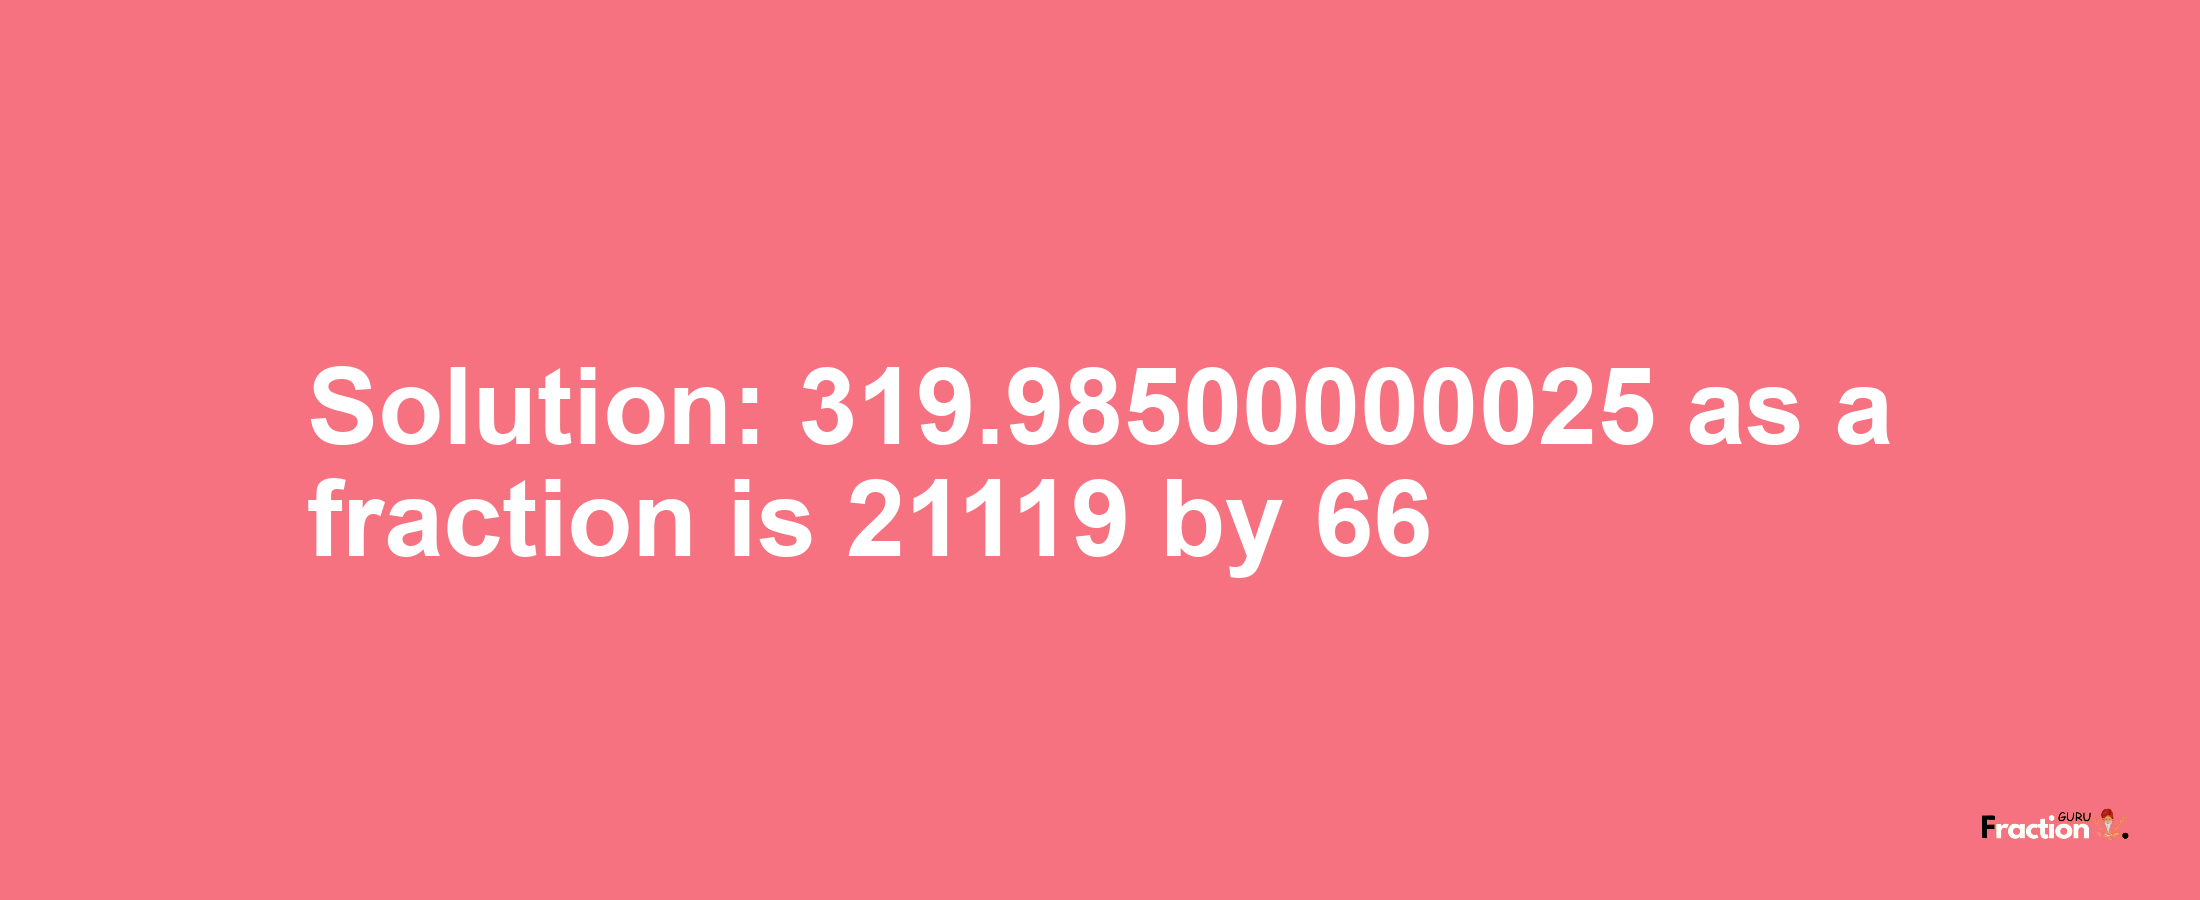 Solution:319.98500000025 as a fraction is 21119/66